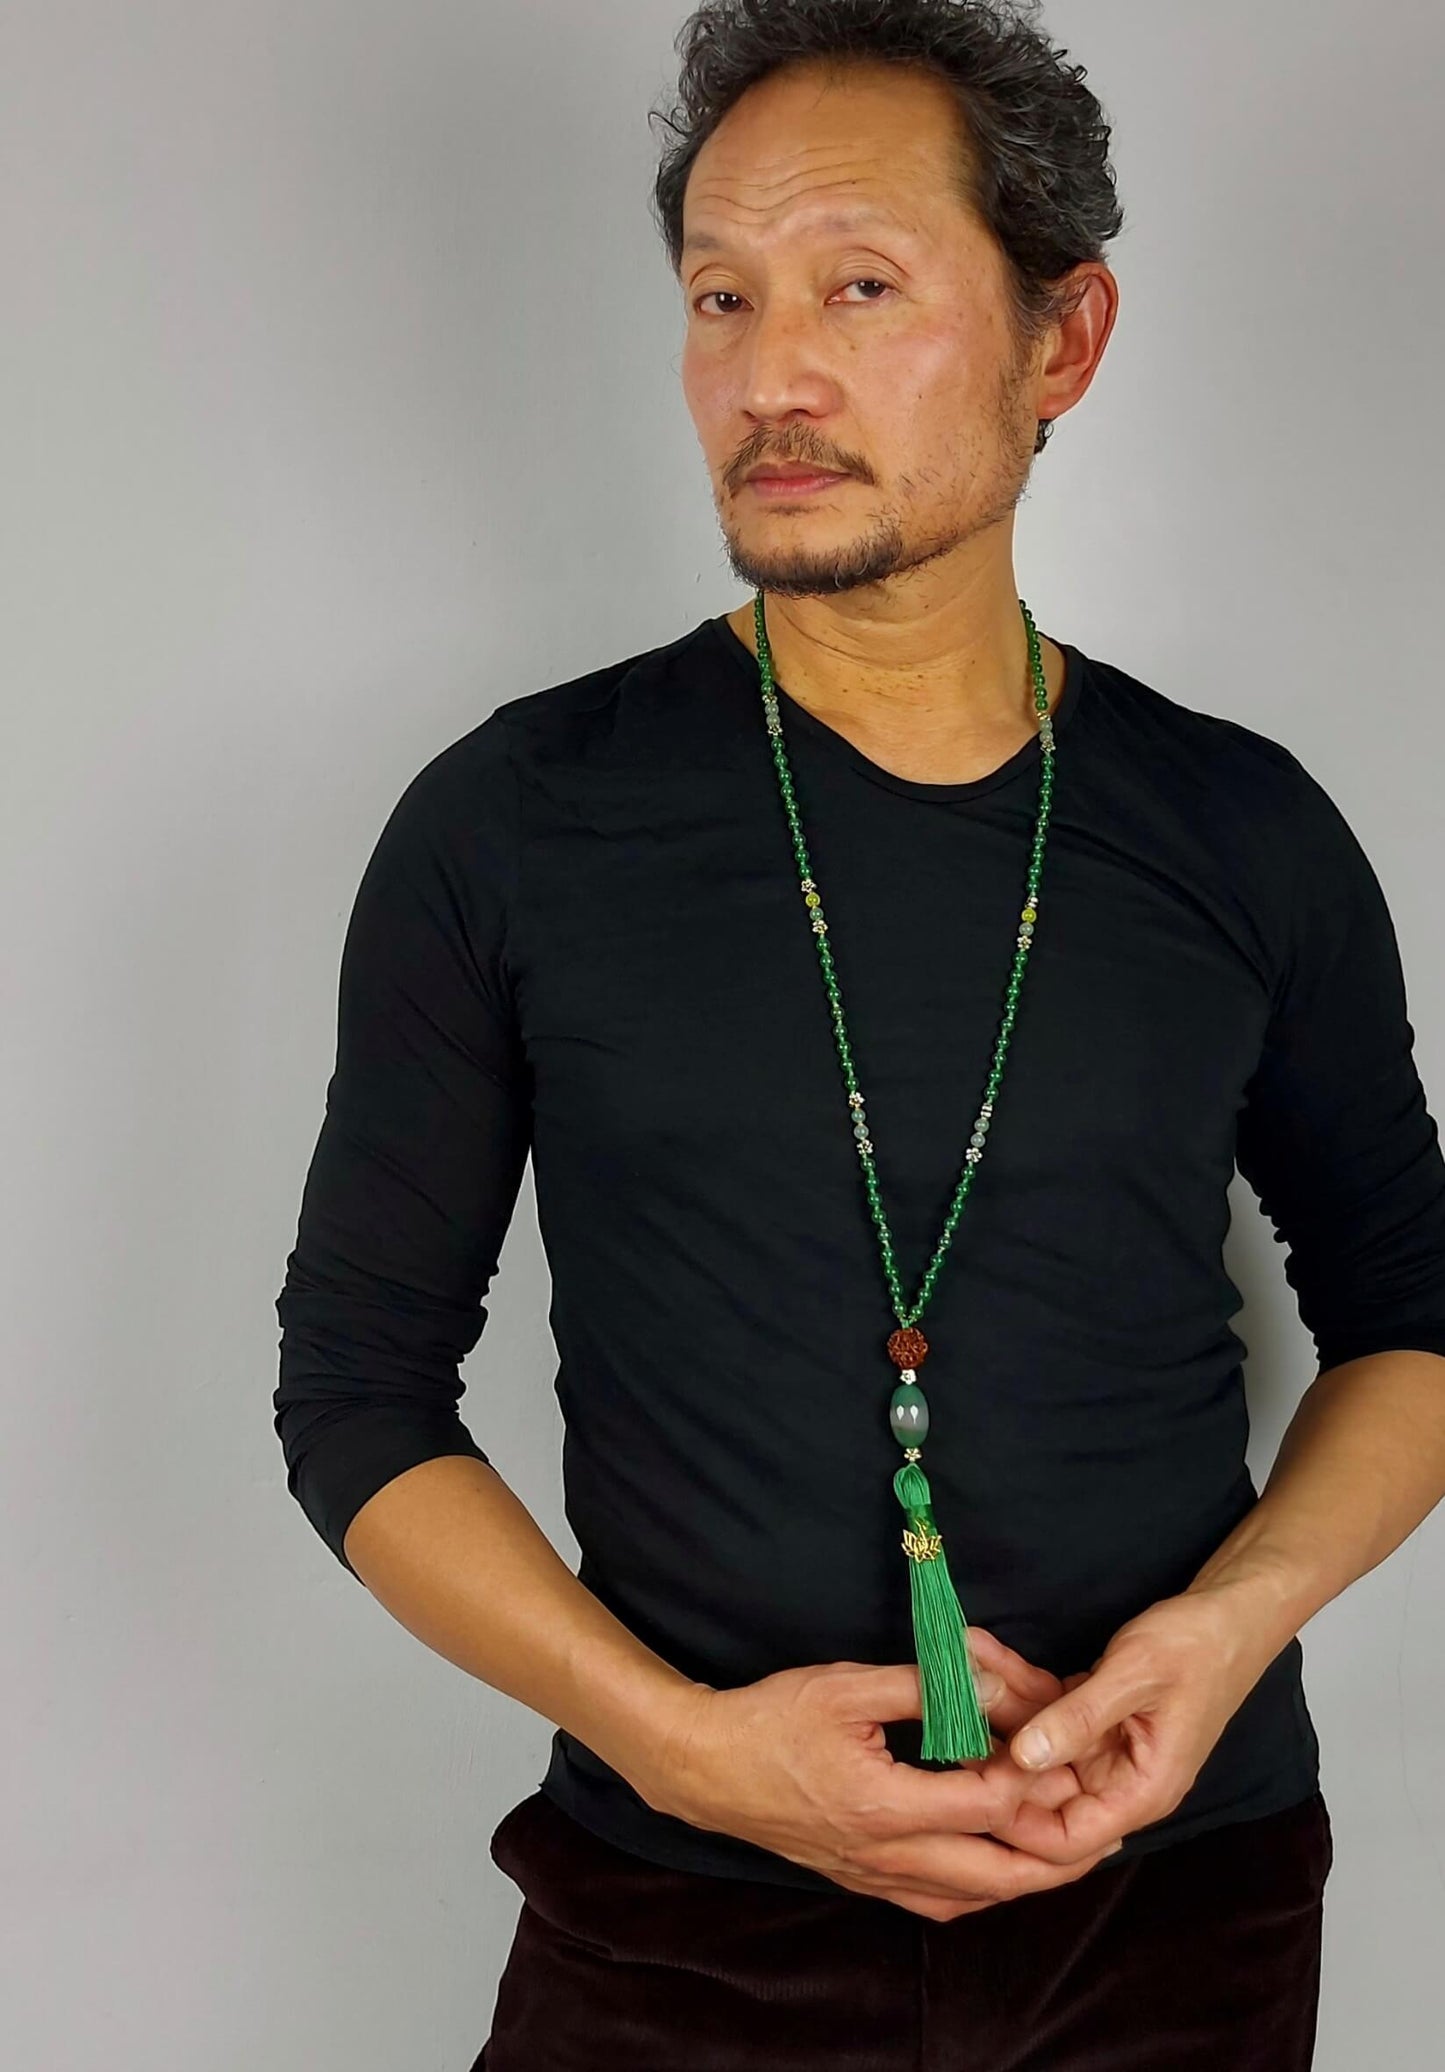 ANAHATA Mala meditation necklace with green agate, jade and aventurine